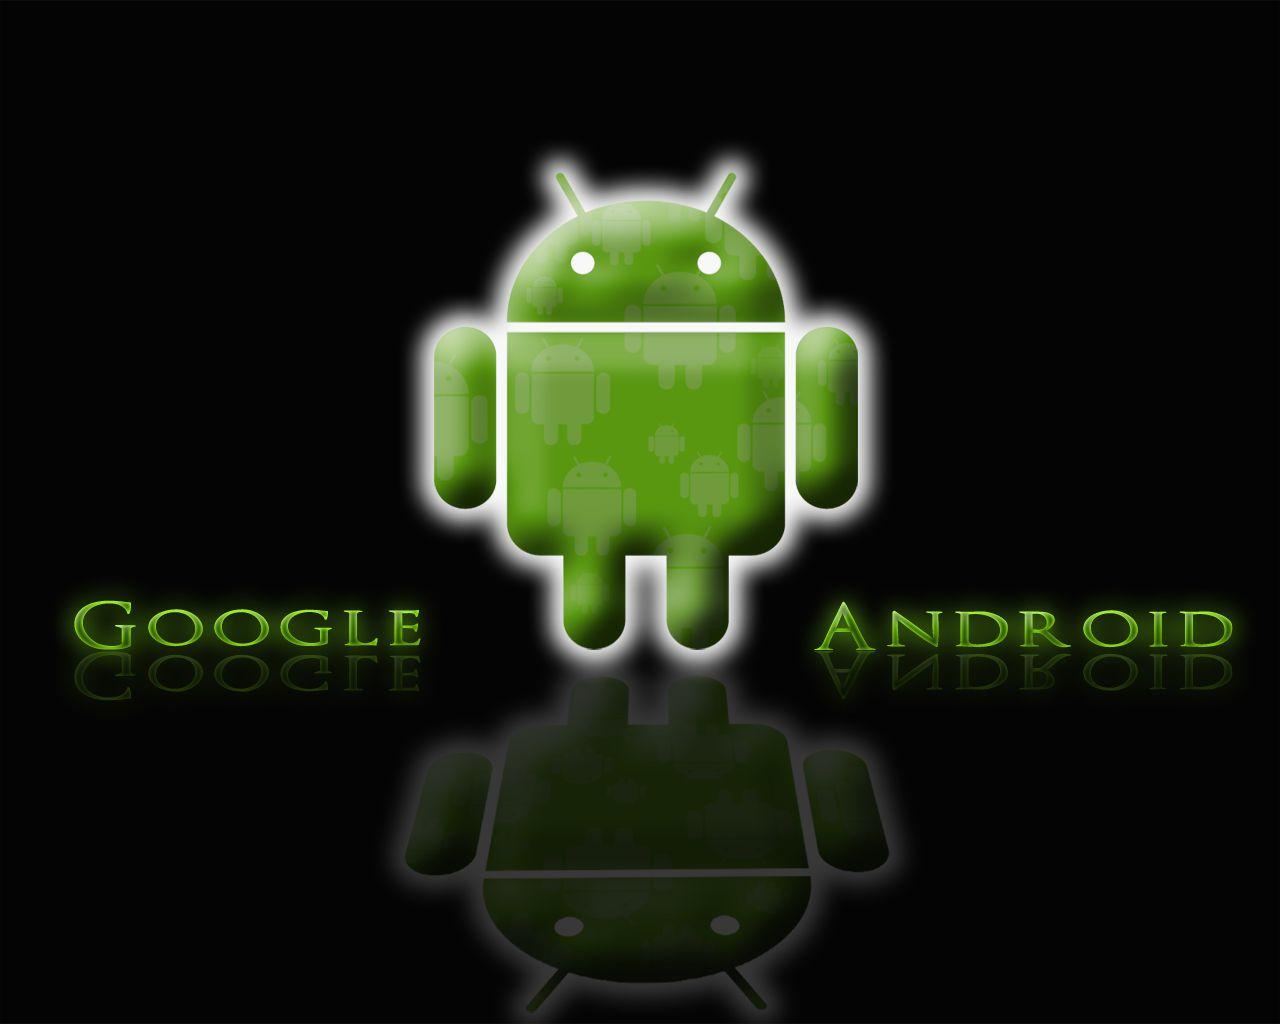 Android Studio Wallpapers - Top Free Android Studio Backgrounds